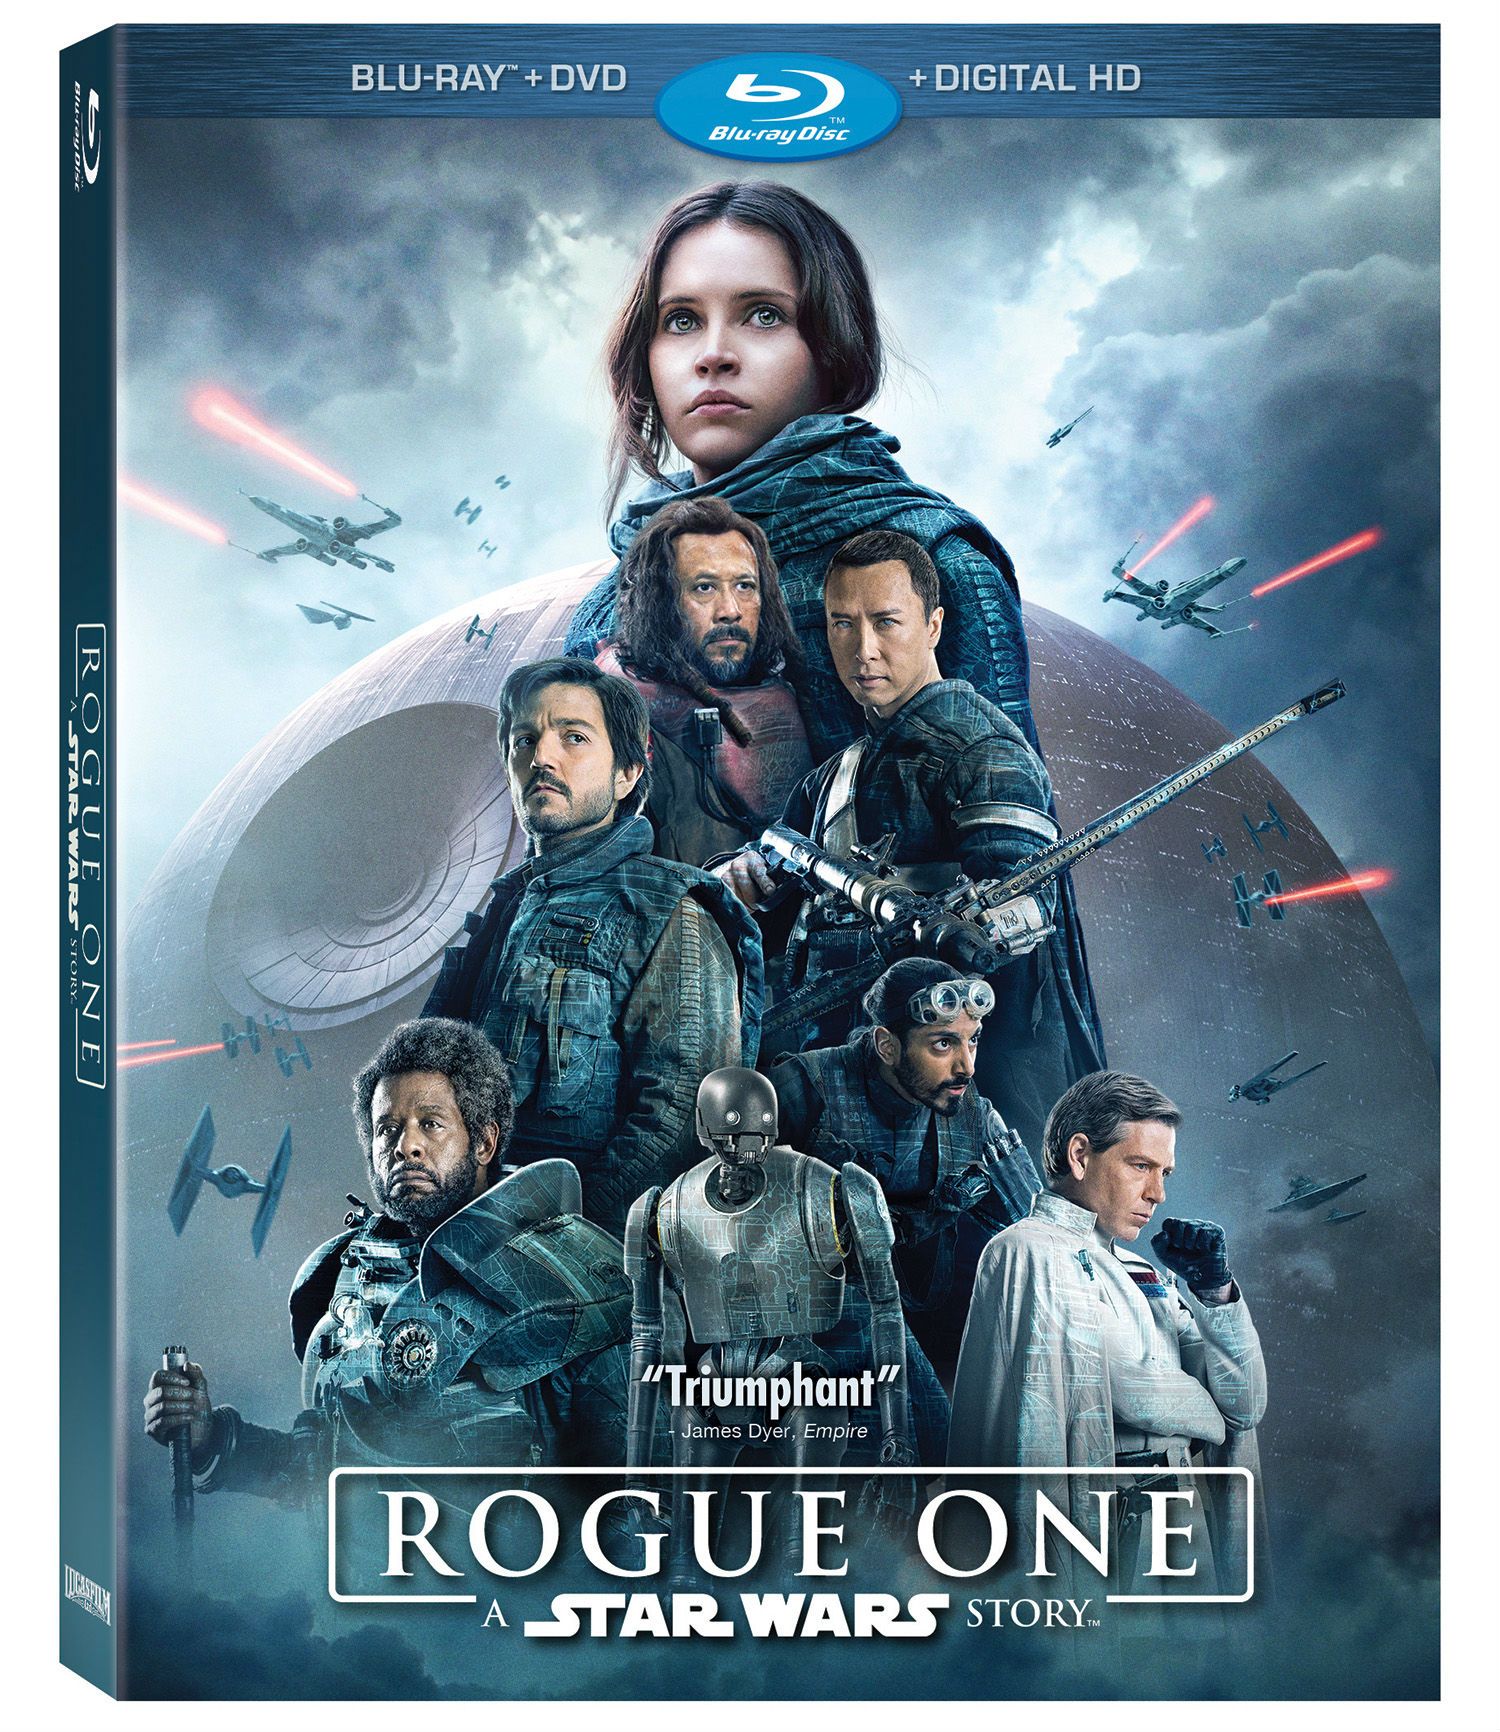 Star Wars: Rogue One Blu-ray Cover Art